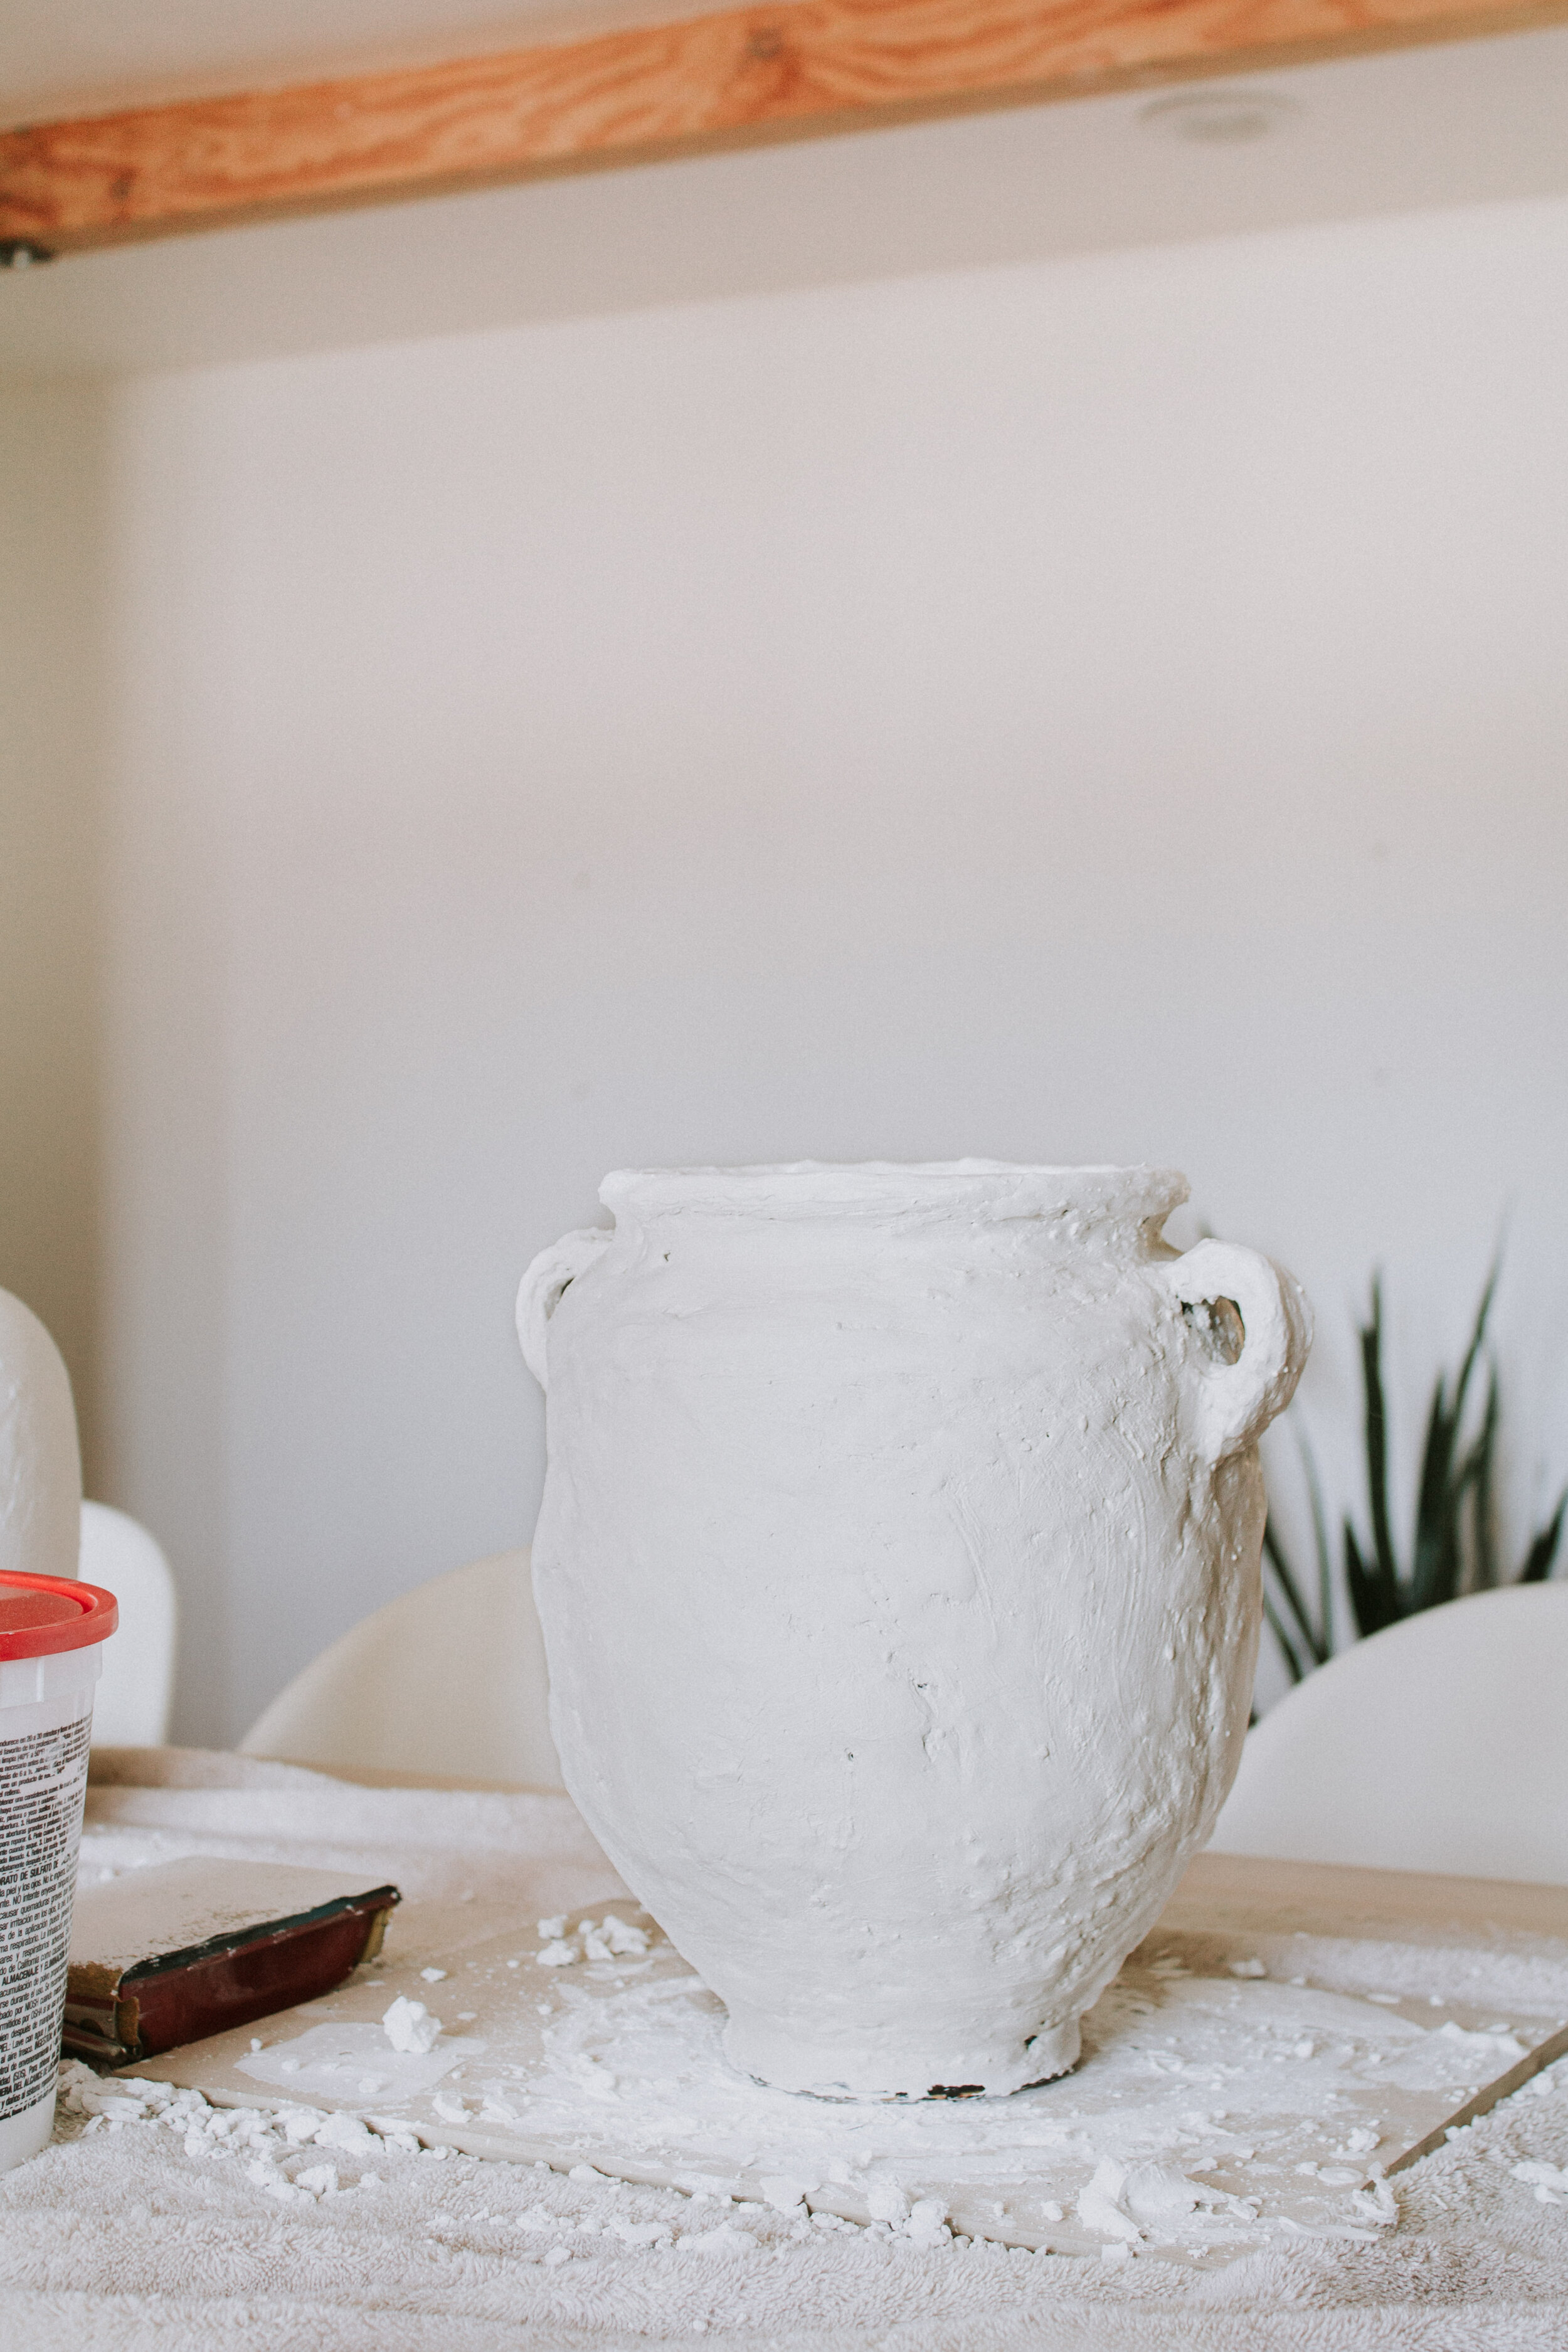 DIY Dark & Dimensional Aged Old World Pottery Makeover - How to make thrifted vases look old and vintage. Thrifted vase makeover with plaster and brown layered paint. Vase Makeover by Nadine Stay.